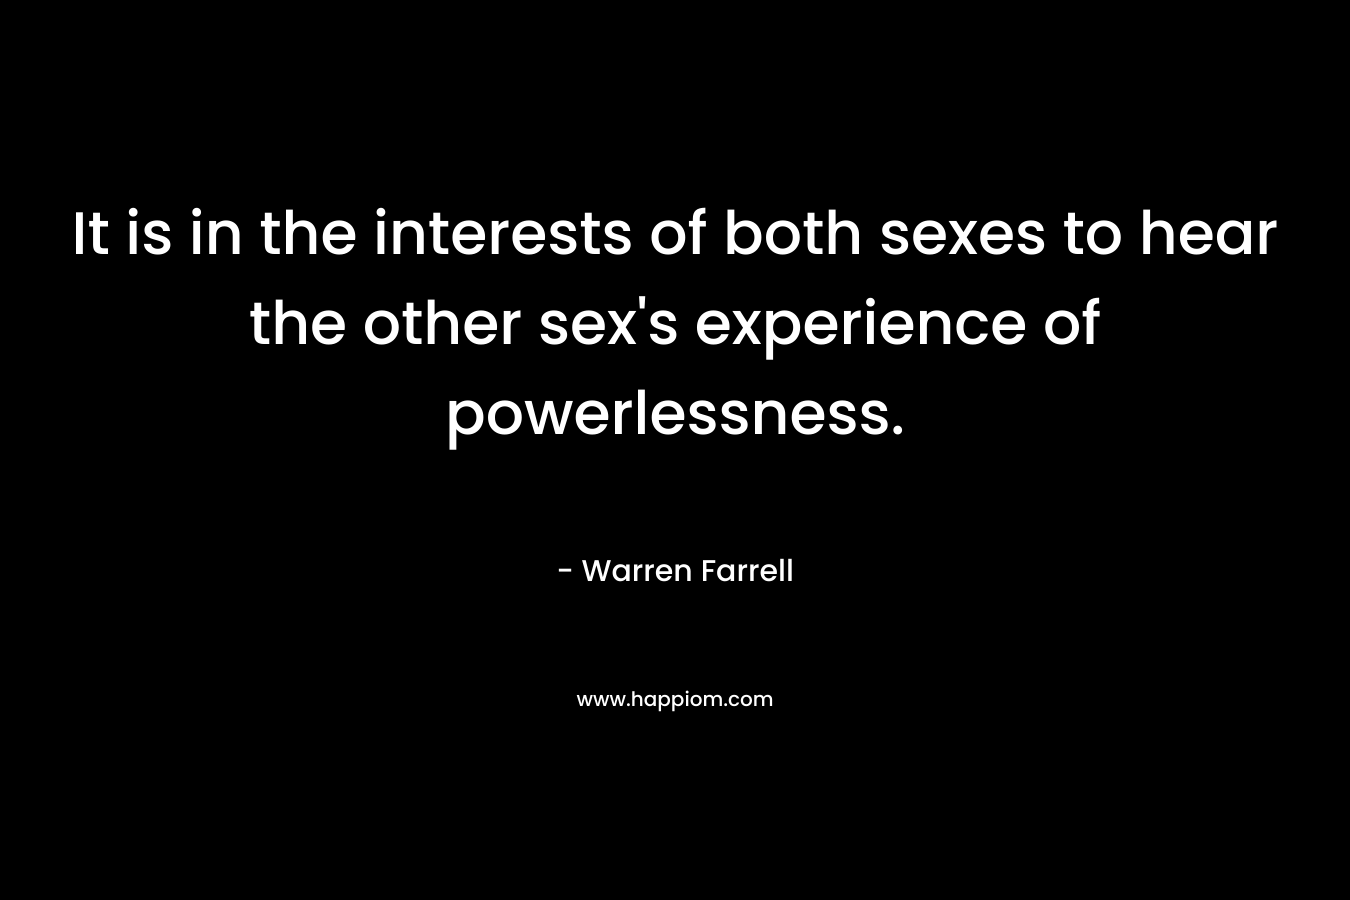 It is in the interests of both sexes to hear the other sex’s experience of powerlessness. – Warren Farrell